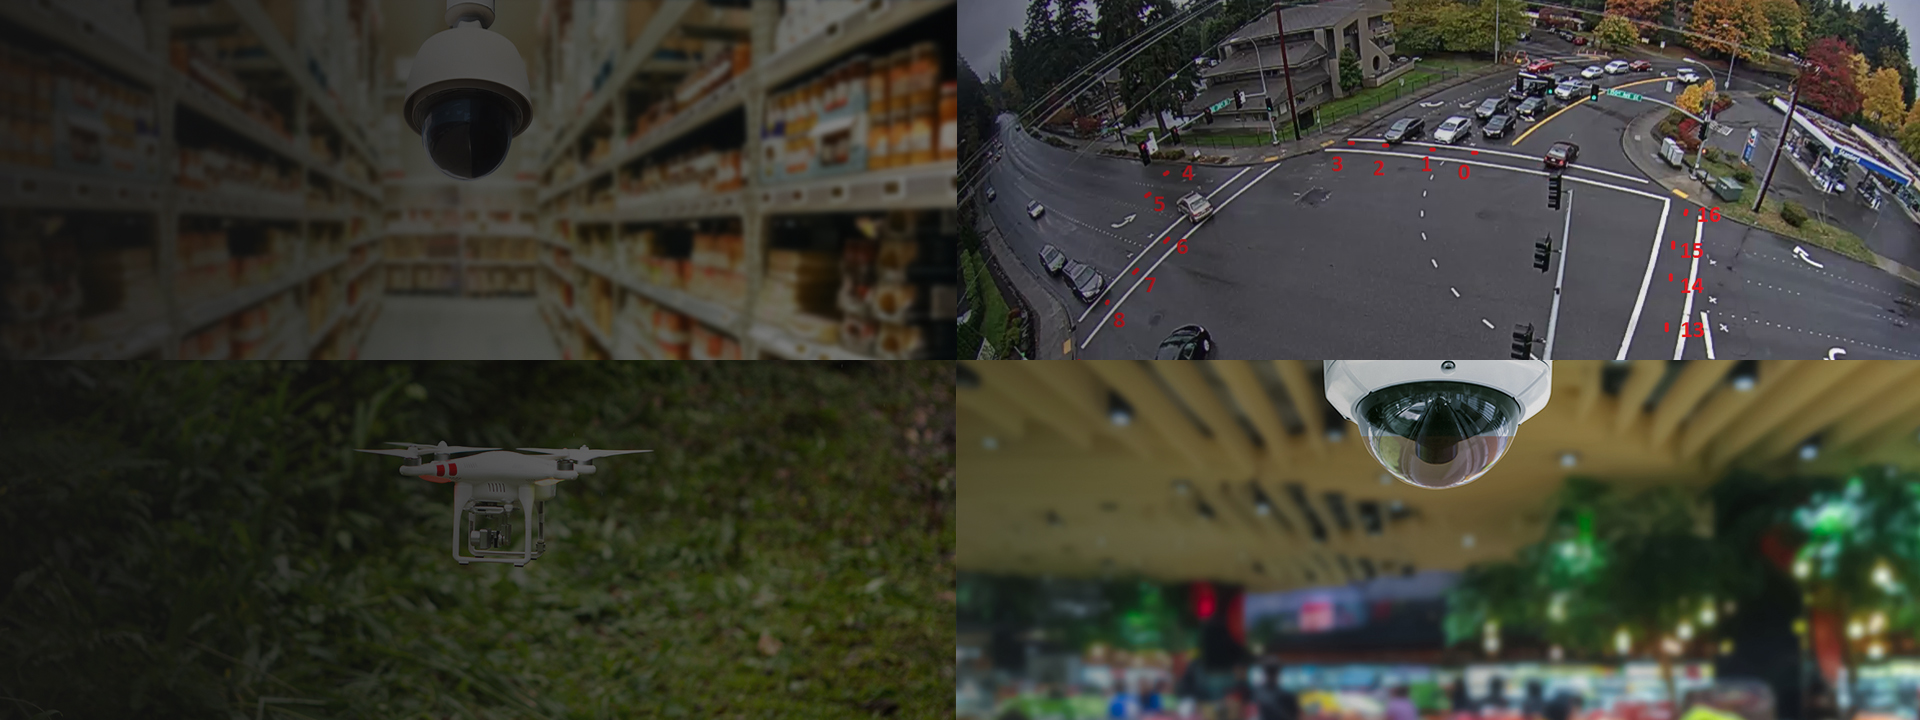 Group of four Live Video Analytics images